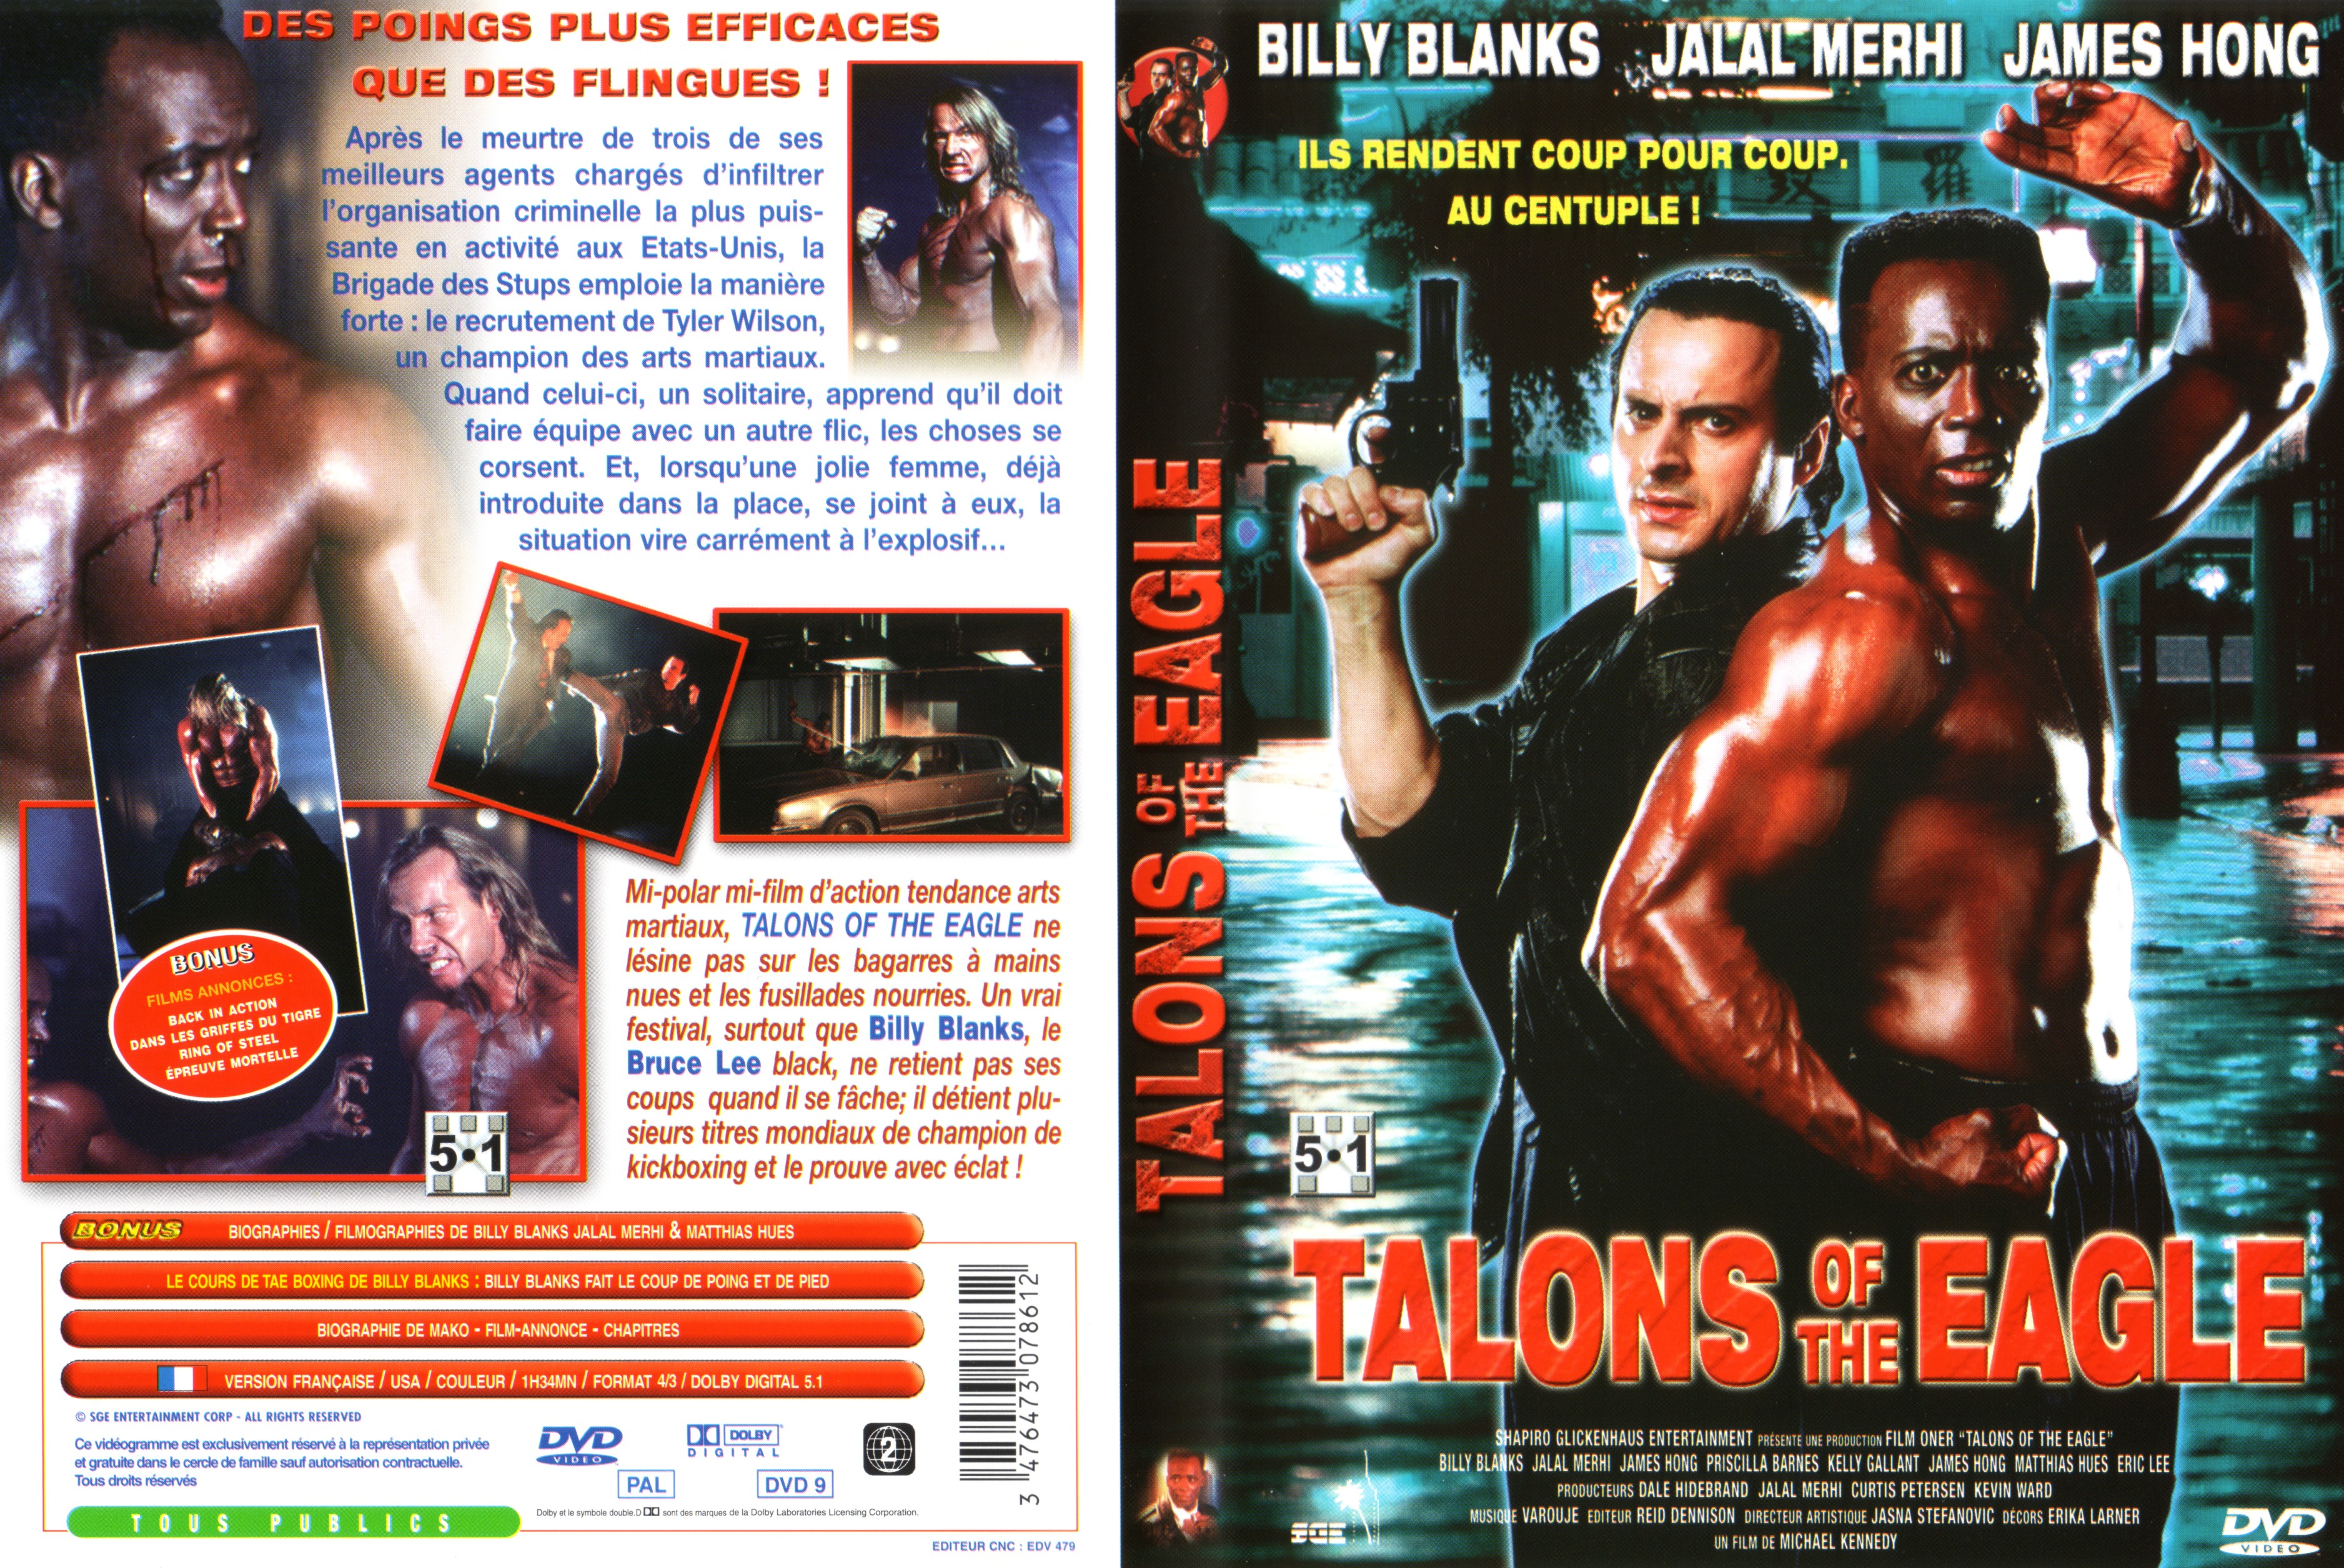 Jaquette DVD Talons of the eagle